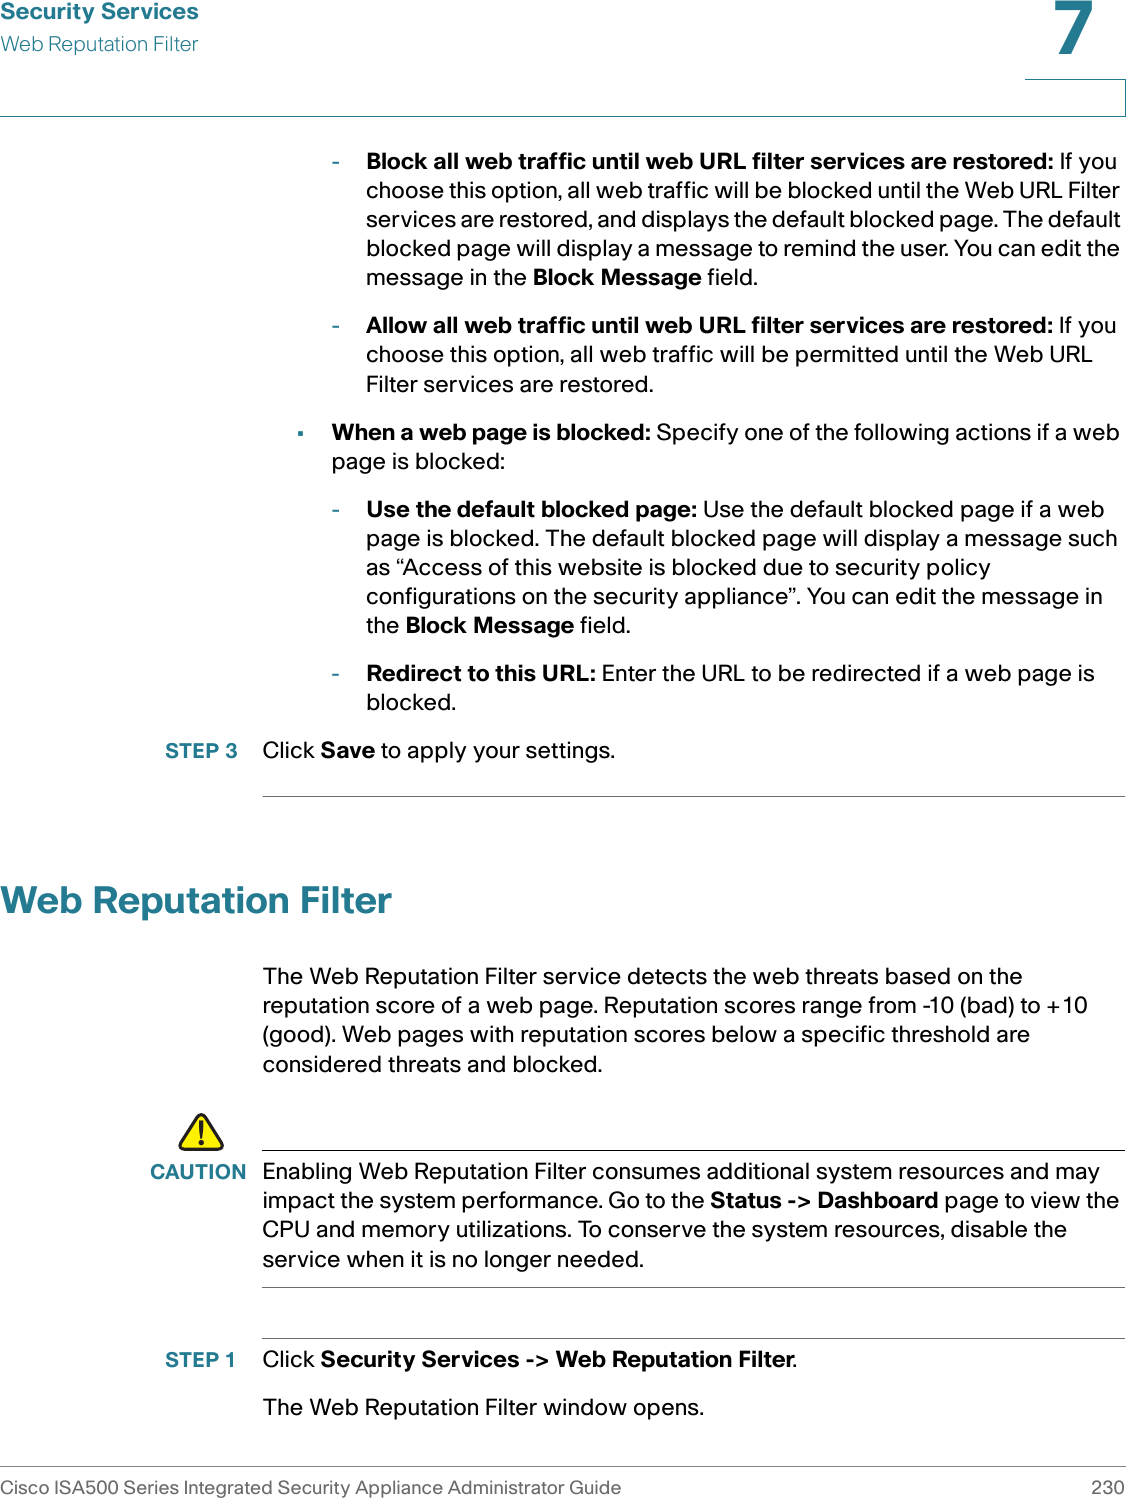 Security ServicesWeb Reputation FilterCisco ISA500 Series Integrated Security Appliance Administrator Guide 2307 -Block all web traffic until web URL filter services are restored: If you choose this option, all web traffic will be blocked until the Web URL Filter services are restored, and displays the default blocked page. The default blocked page will display a message to remind the user. You can edit the message in the Block Message field.-Allow all web traffic until web URL filter services are restored: If you choose this option, all web traffic will be permitted until the Web URL Filter services are restored. •When a web page is blocked: Specify one of the following actions if a web page is blocked:-Use the default blocked page: Use the default blocked page if a web page is blocked. The default blocked page will display a message such as “Access of this website is blocked due to security policy configurations on the security appliance”. You can edit the message in the Block Message field. -Redirect to this URL: Enter the URL to be redirected if a web page is blocked. STEP 3 Click Save to apply your settings. Web Reputation FilterThe Web Reputation Filter service detects the web threats based on the reputation score of a web page. Reputation scores range from -10 (bad) to +10 (good). Web pages with reputation scores below a specific threshold are considered threats and blocked. !CAUTION Enabling Web Reputation Filter consumes additional system resources and may impact the system performance. Go to the Status -&gt; Dashboard page to view the CPU and memory utilizations. To conserve the system resources, disable the service when it is no longer needed.STEP 1 Click Security Services -&gt; Web Reputation Filter. The Web Reputation Filter window opens. 